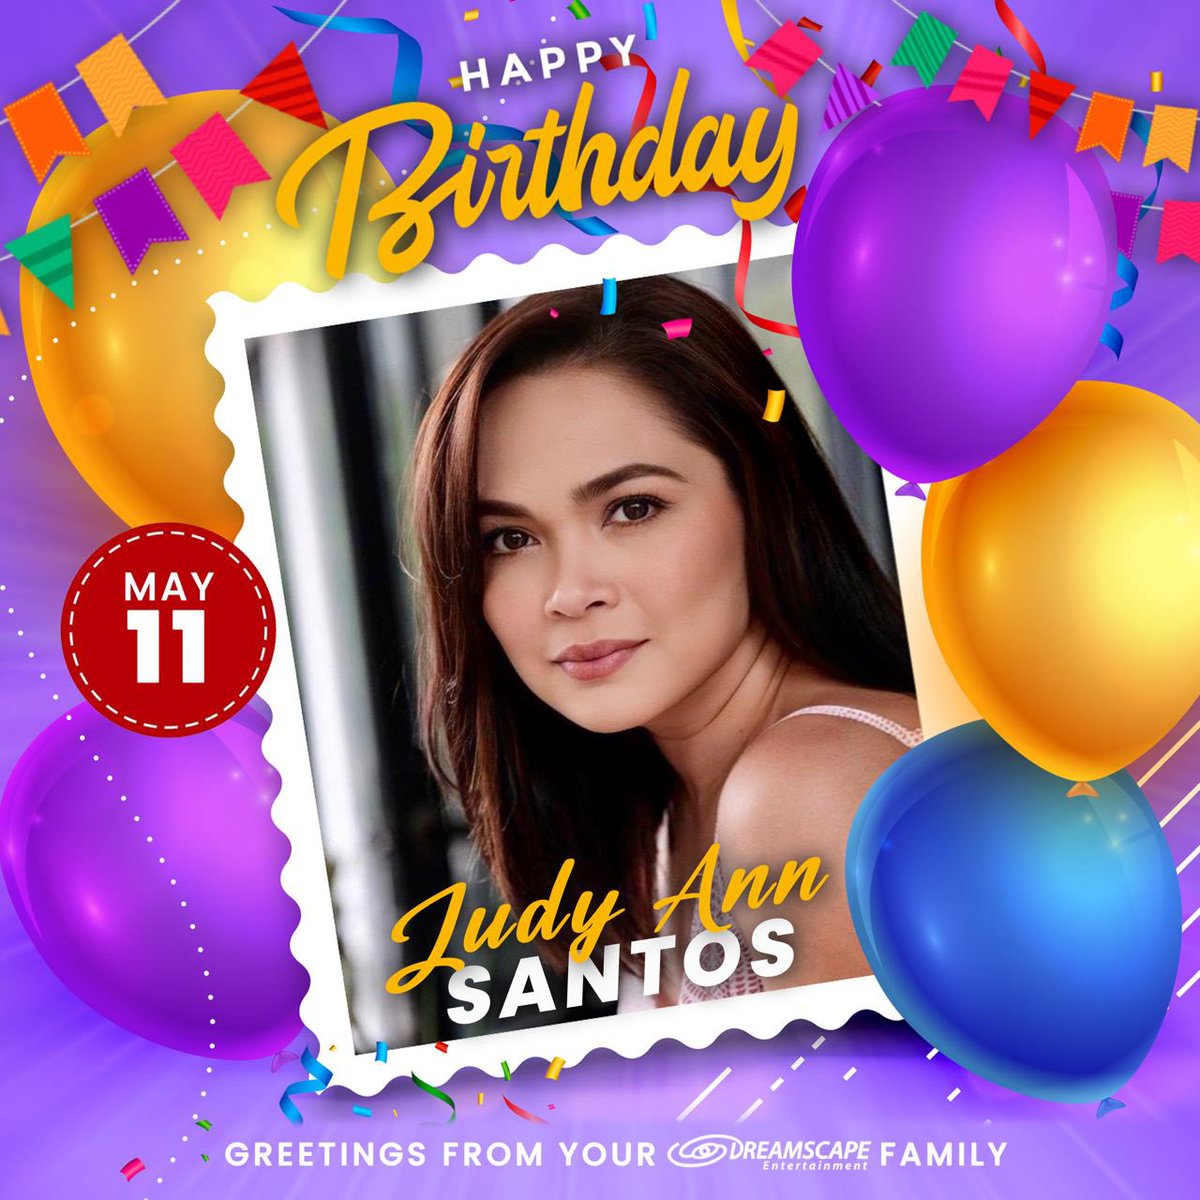 Happy Birthday to the Queen, Judy Ann Santos! 🤍 @OfficialJuday Greetings from your Dreamscape Family! 💜